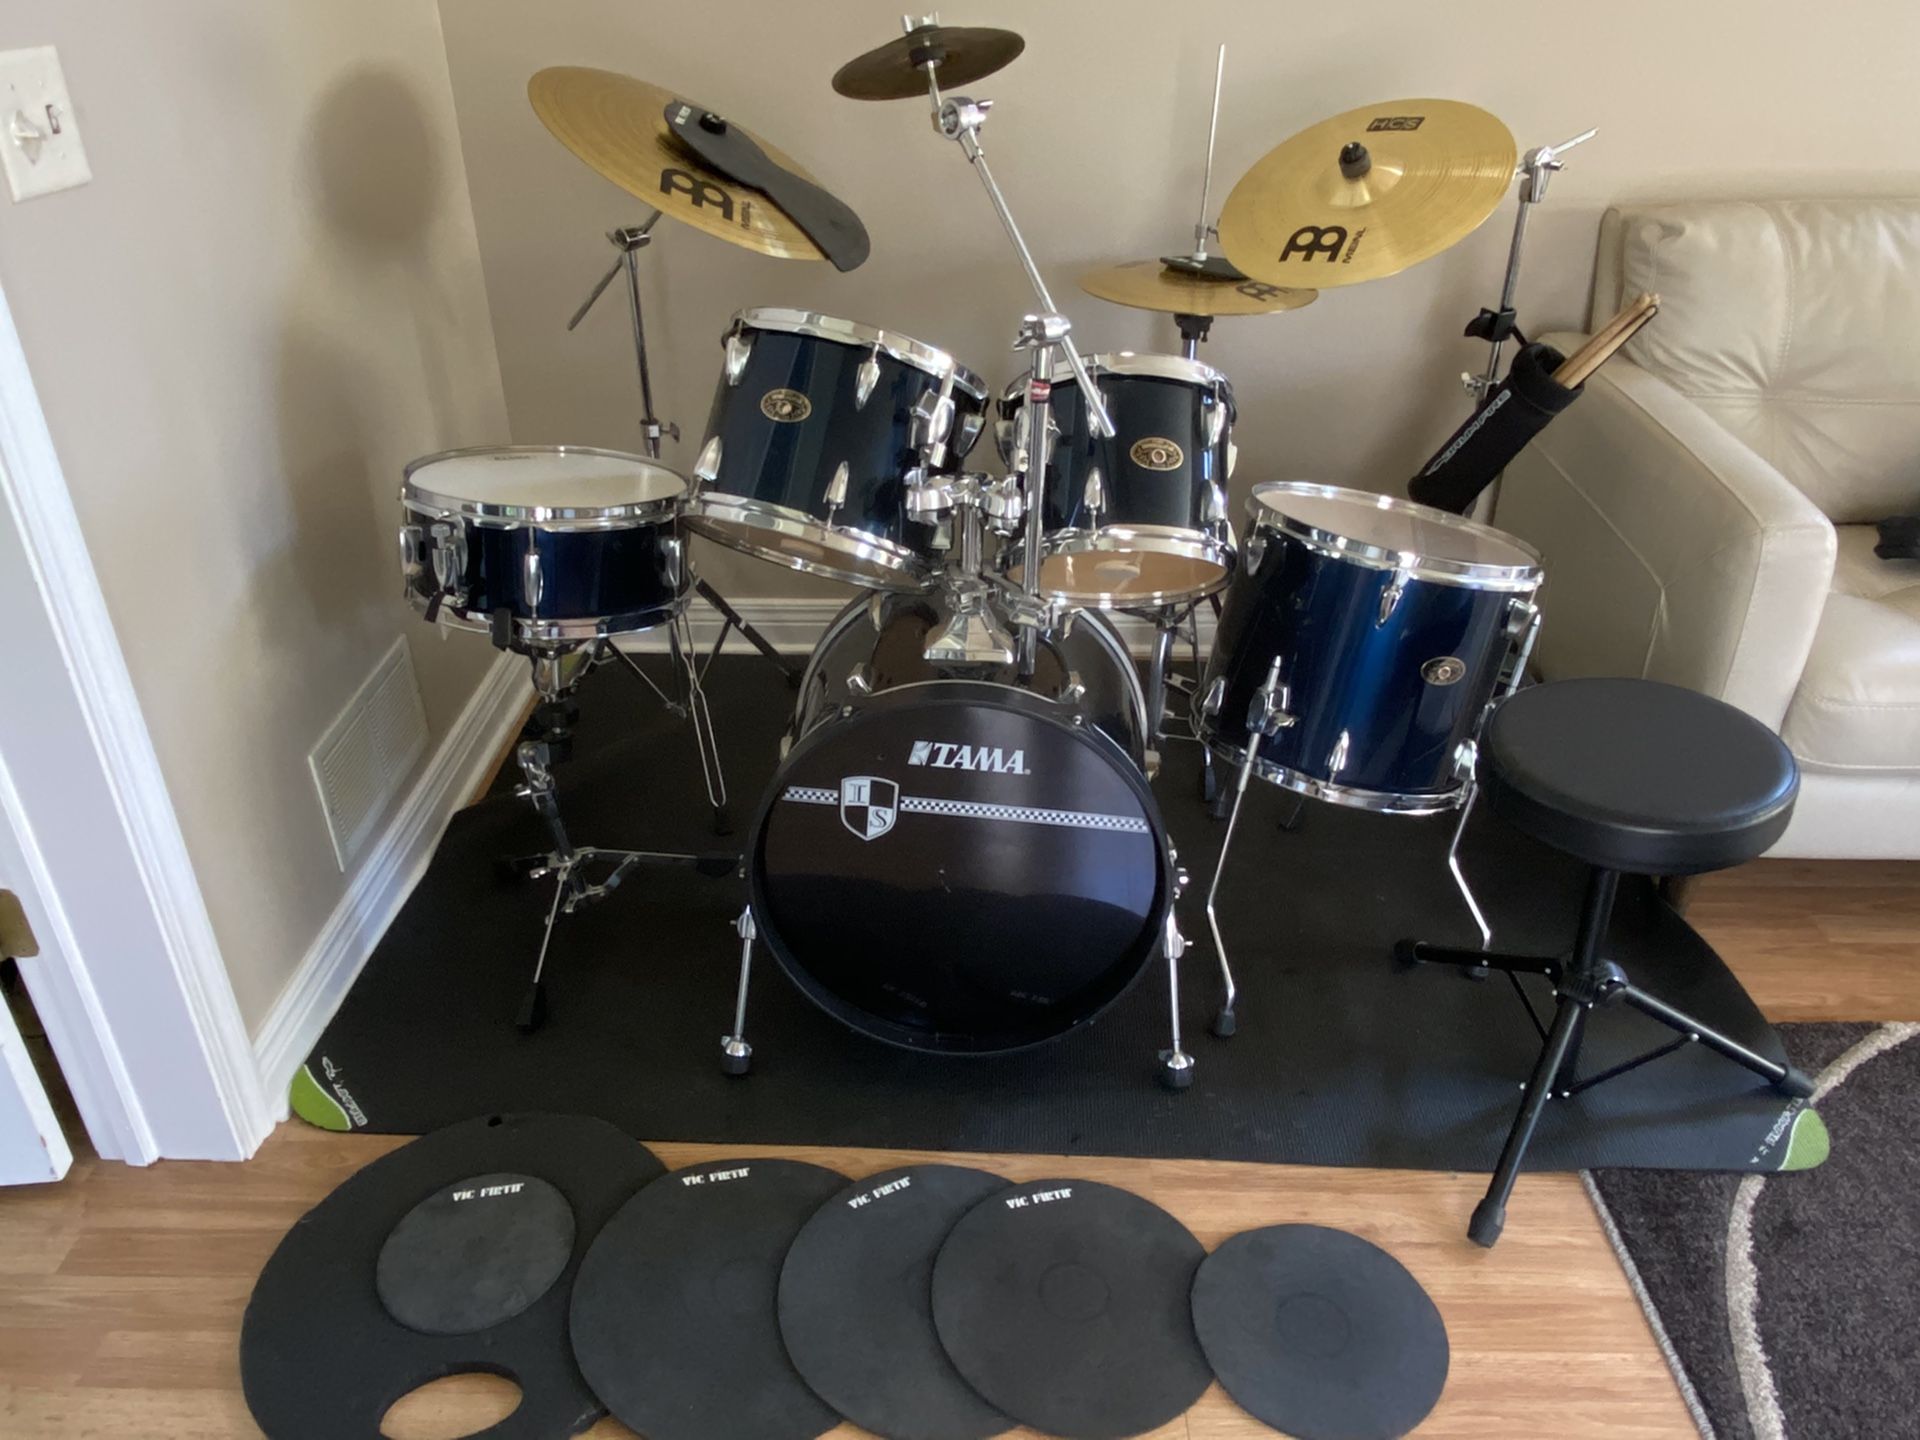 Tama Drum Set with Meinl cymbals / Vic firth silencers